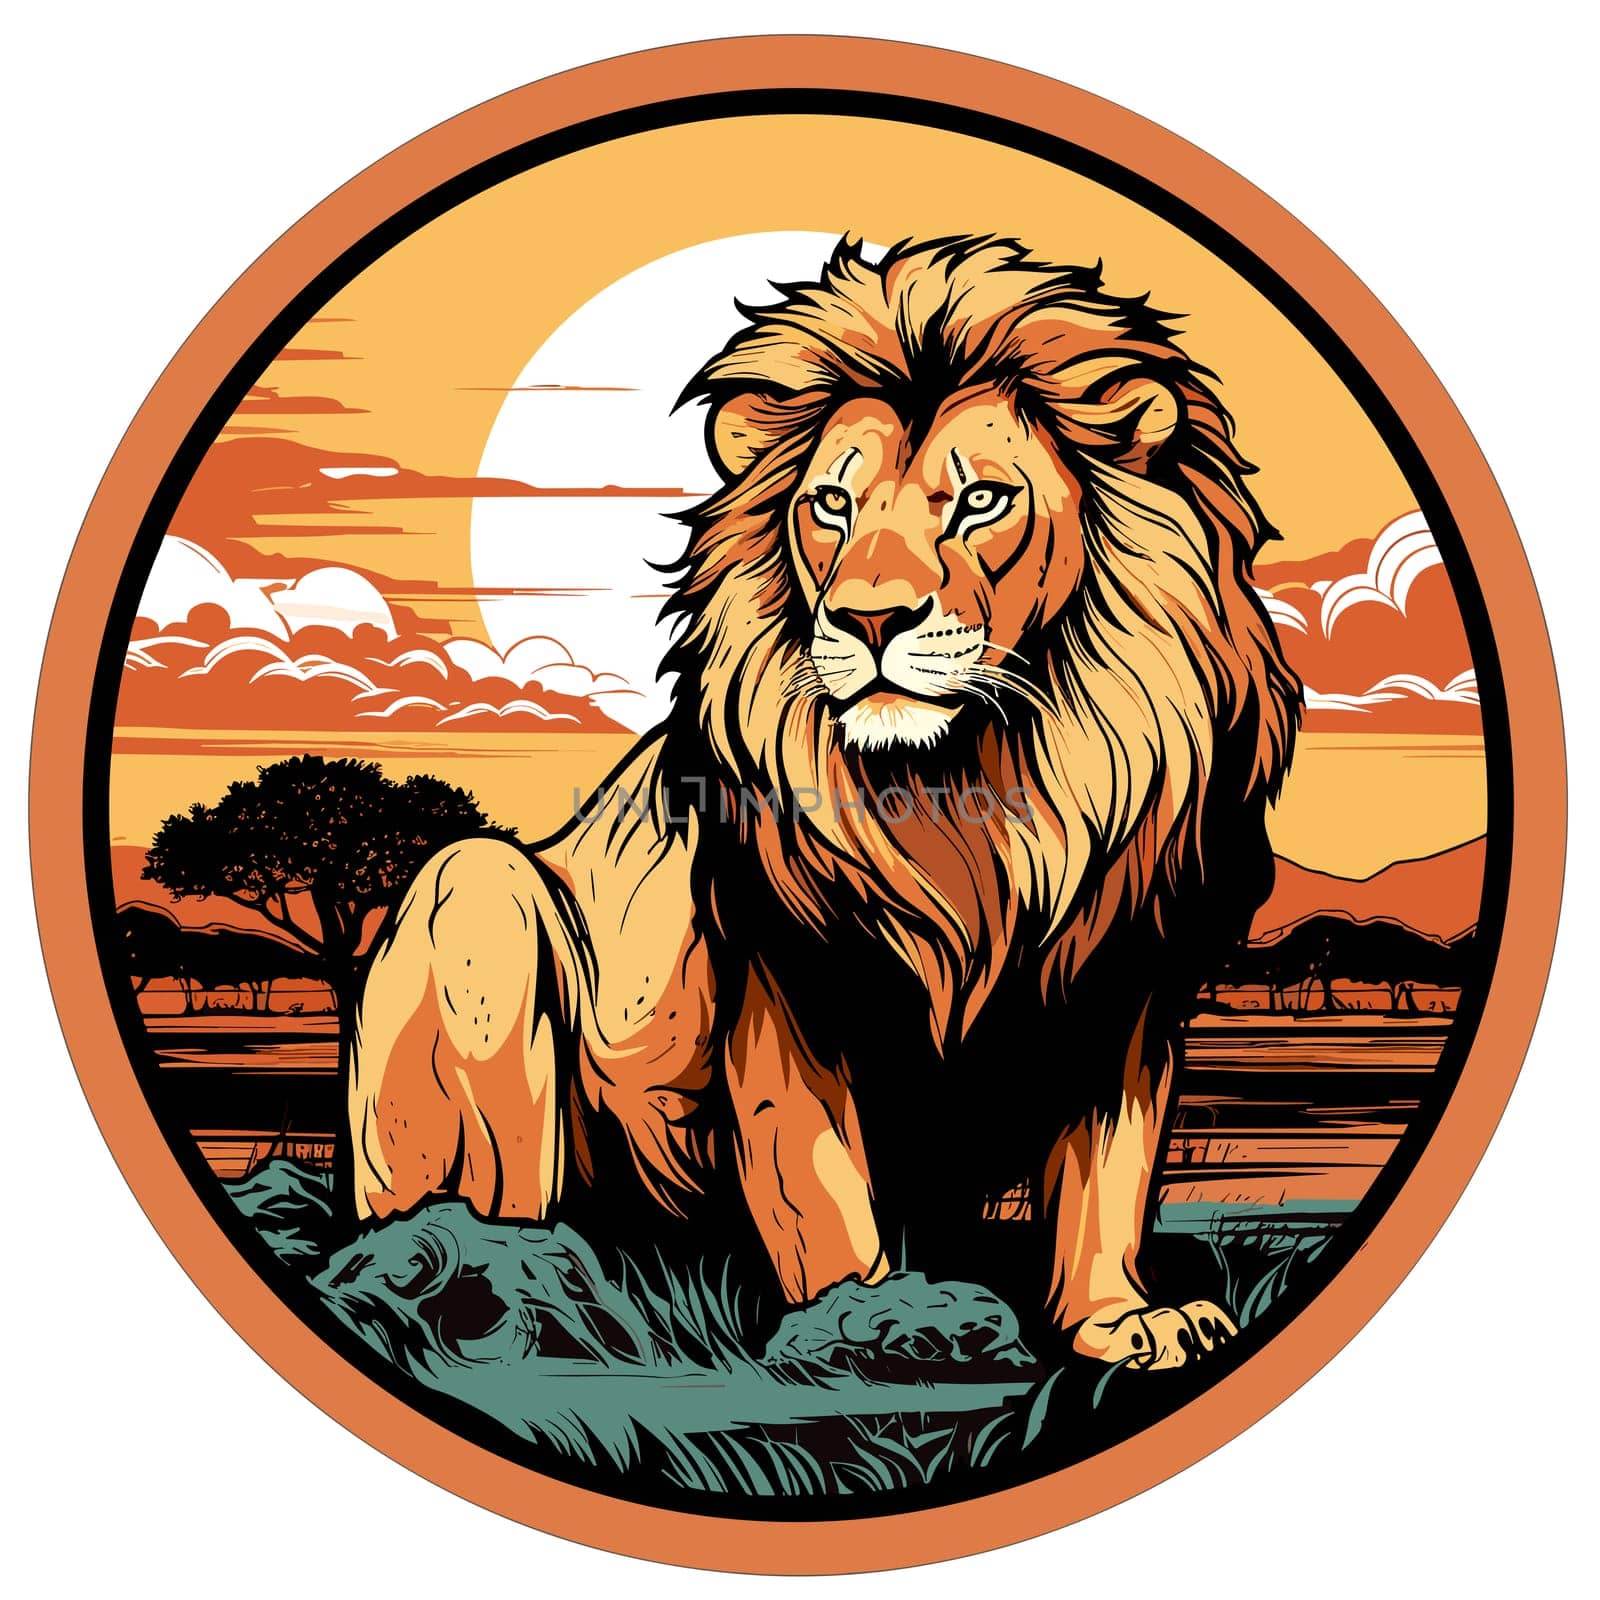 Lion King on nature background in vector mosaic pop art style by palinchak